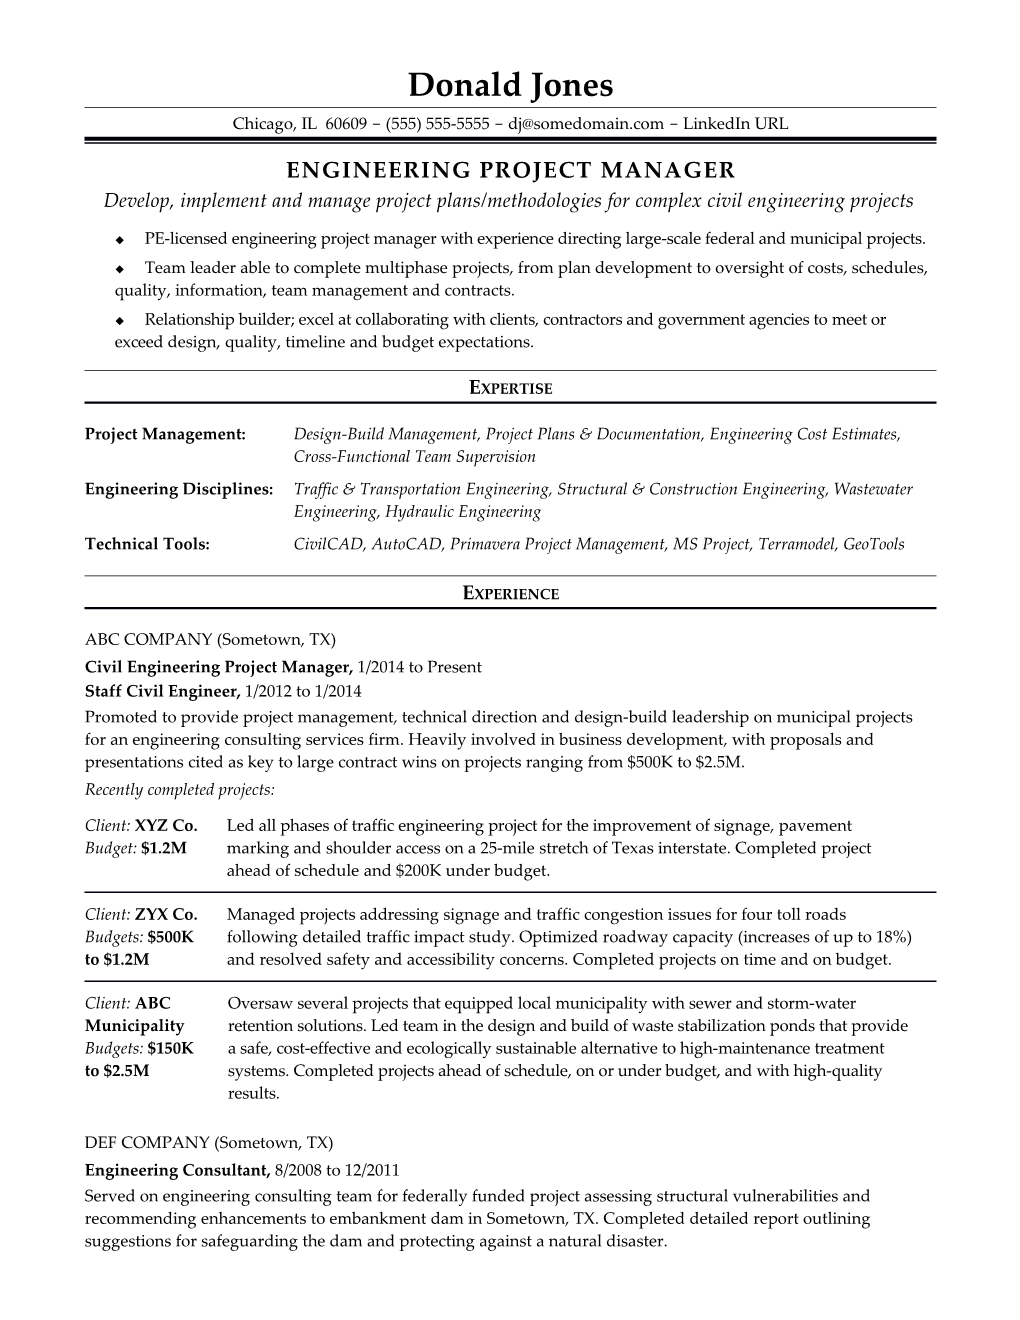 Midlevel Engineering Project Manager